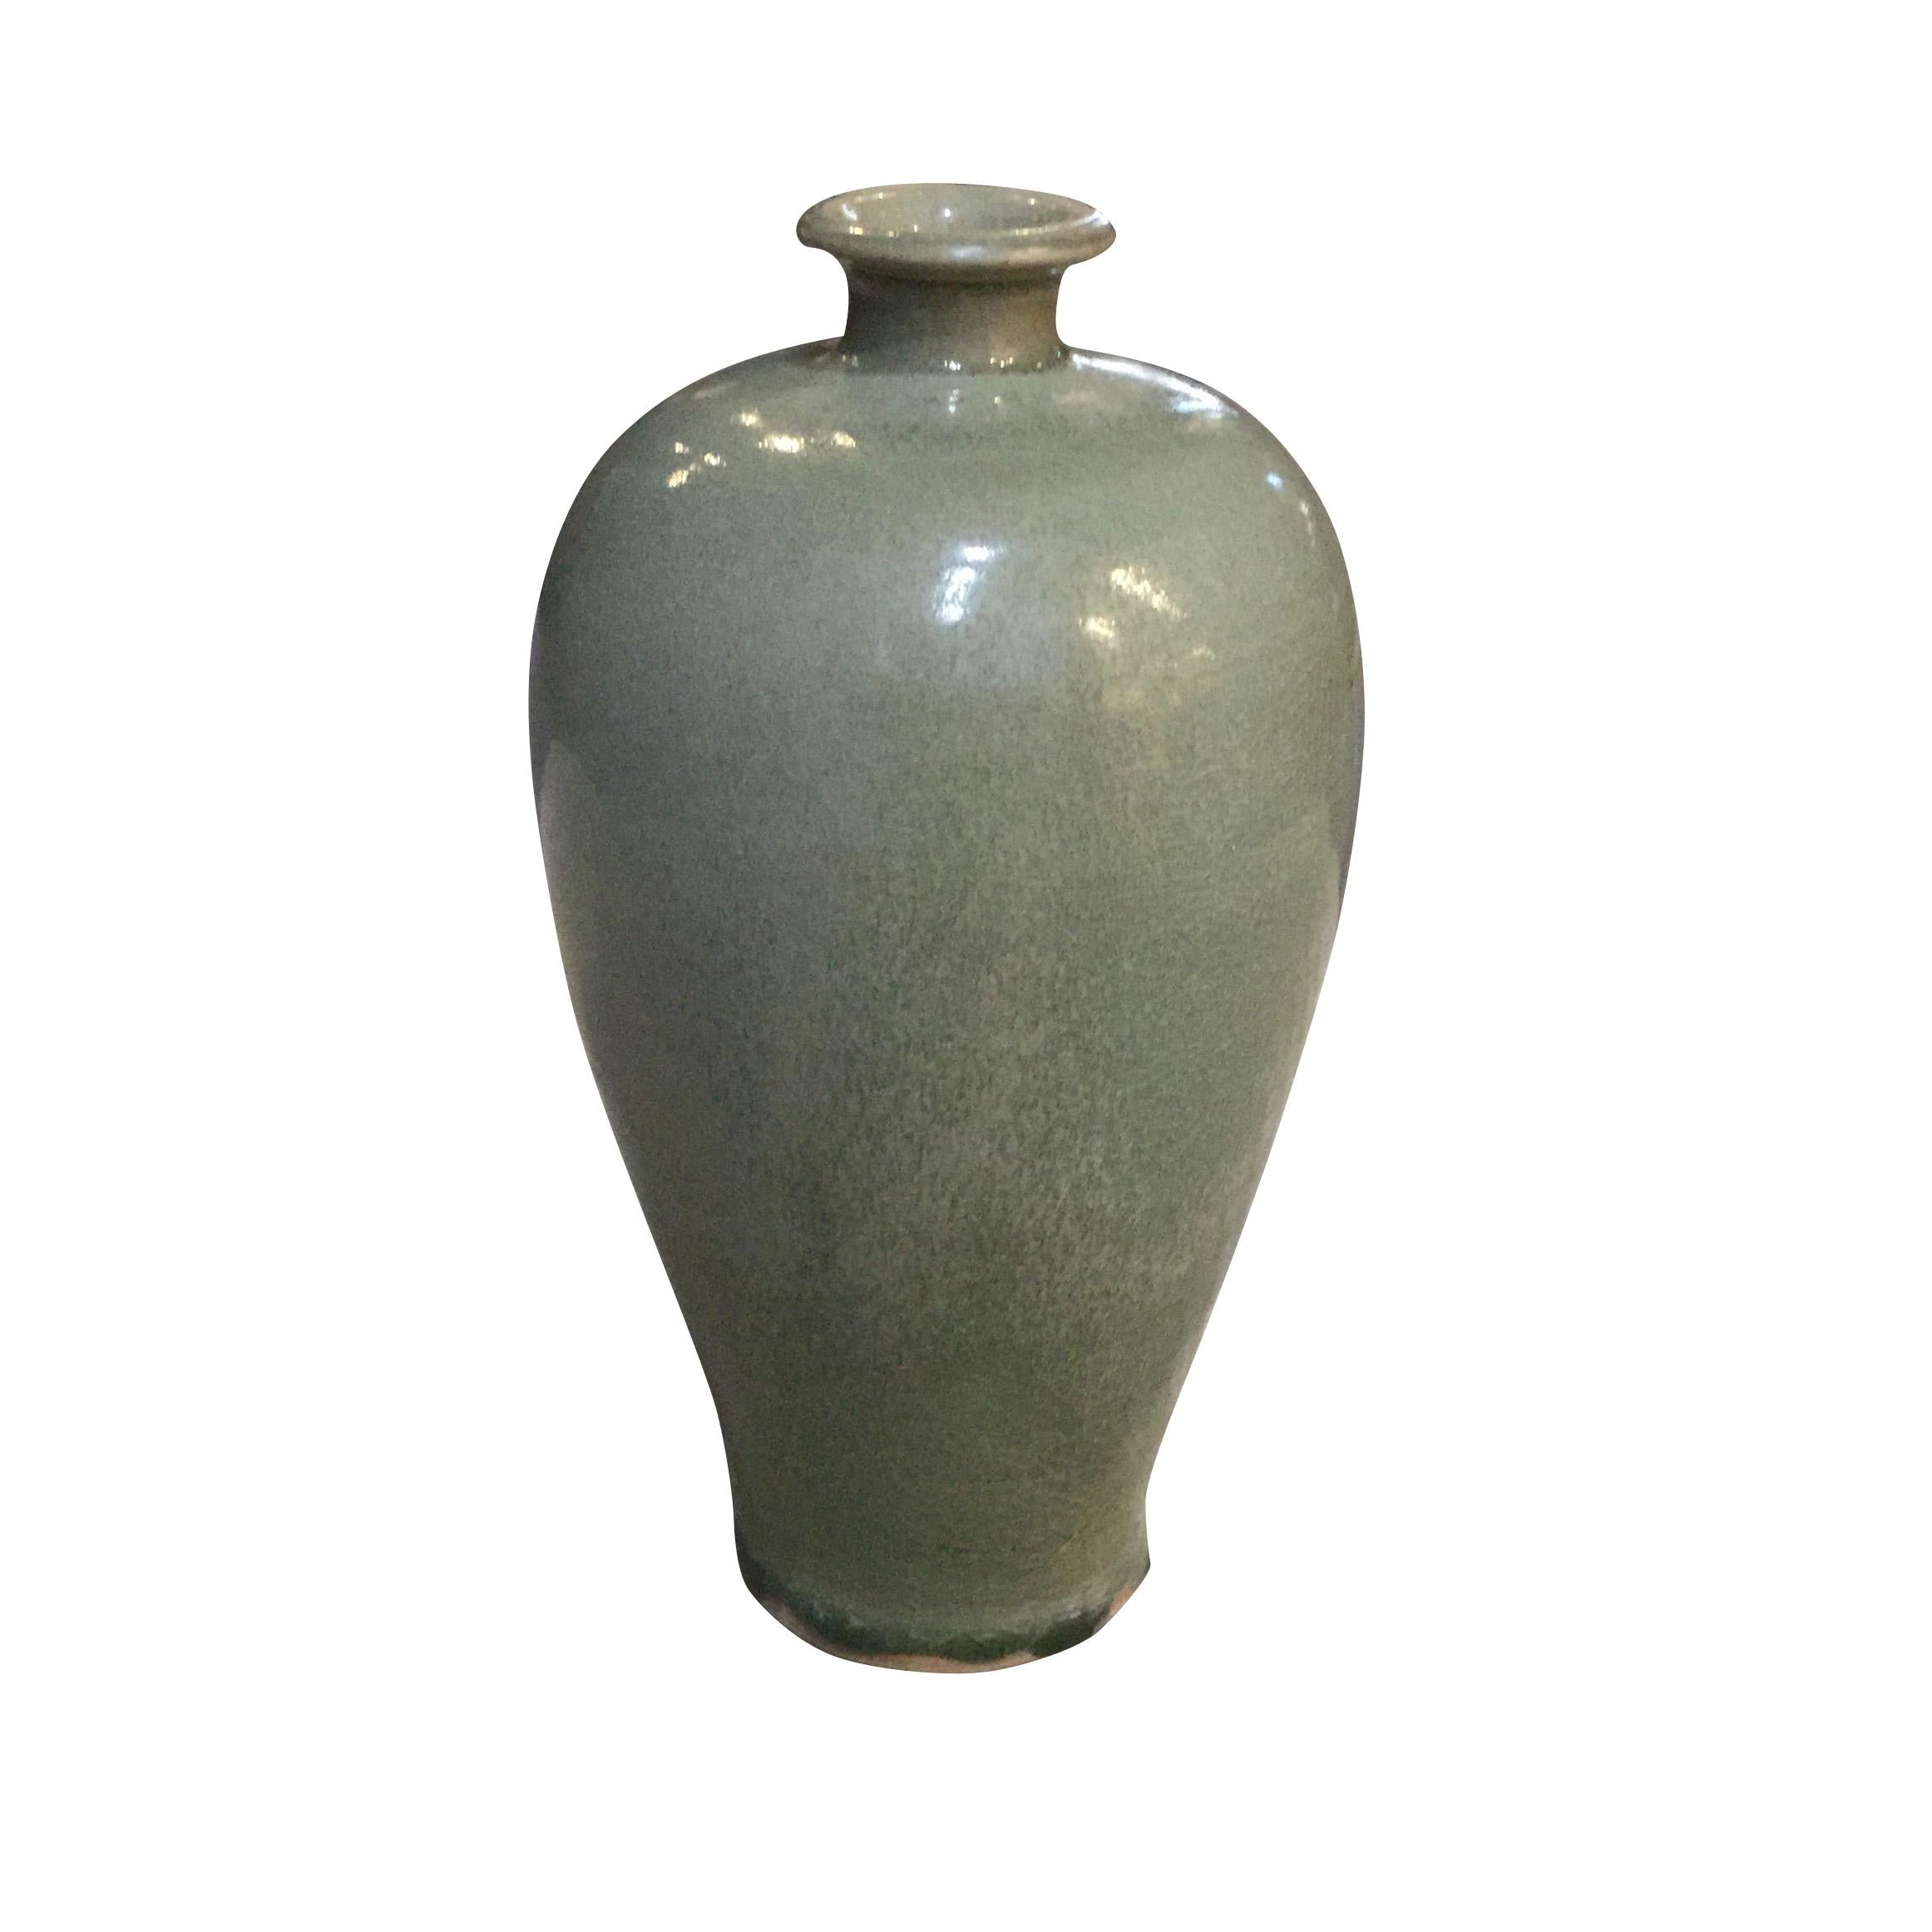 Contemporary Chinese celedon glazed ceramic vases.
Two are available and sold individually.
  